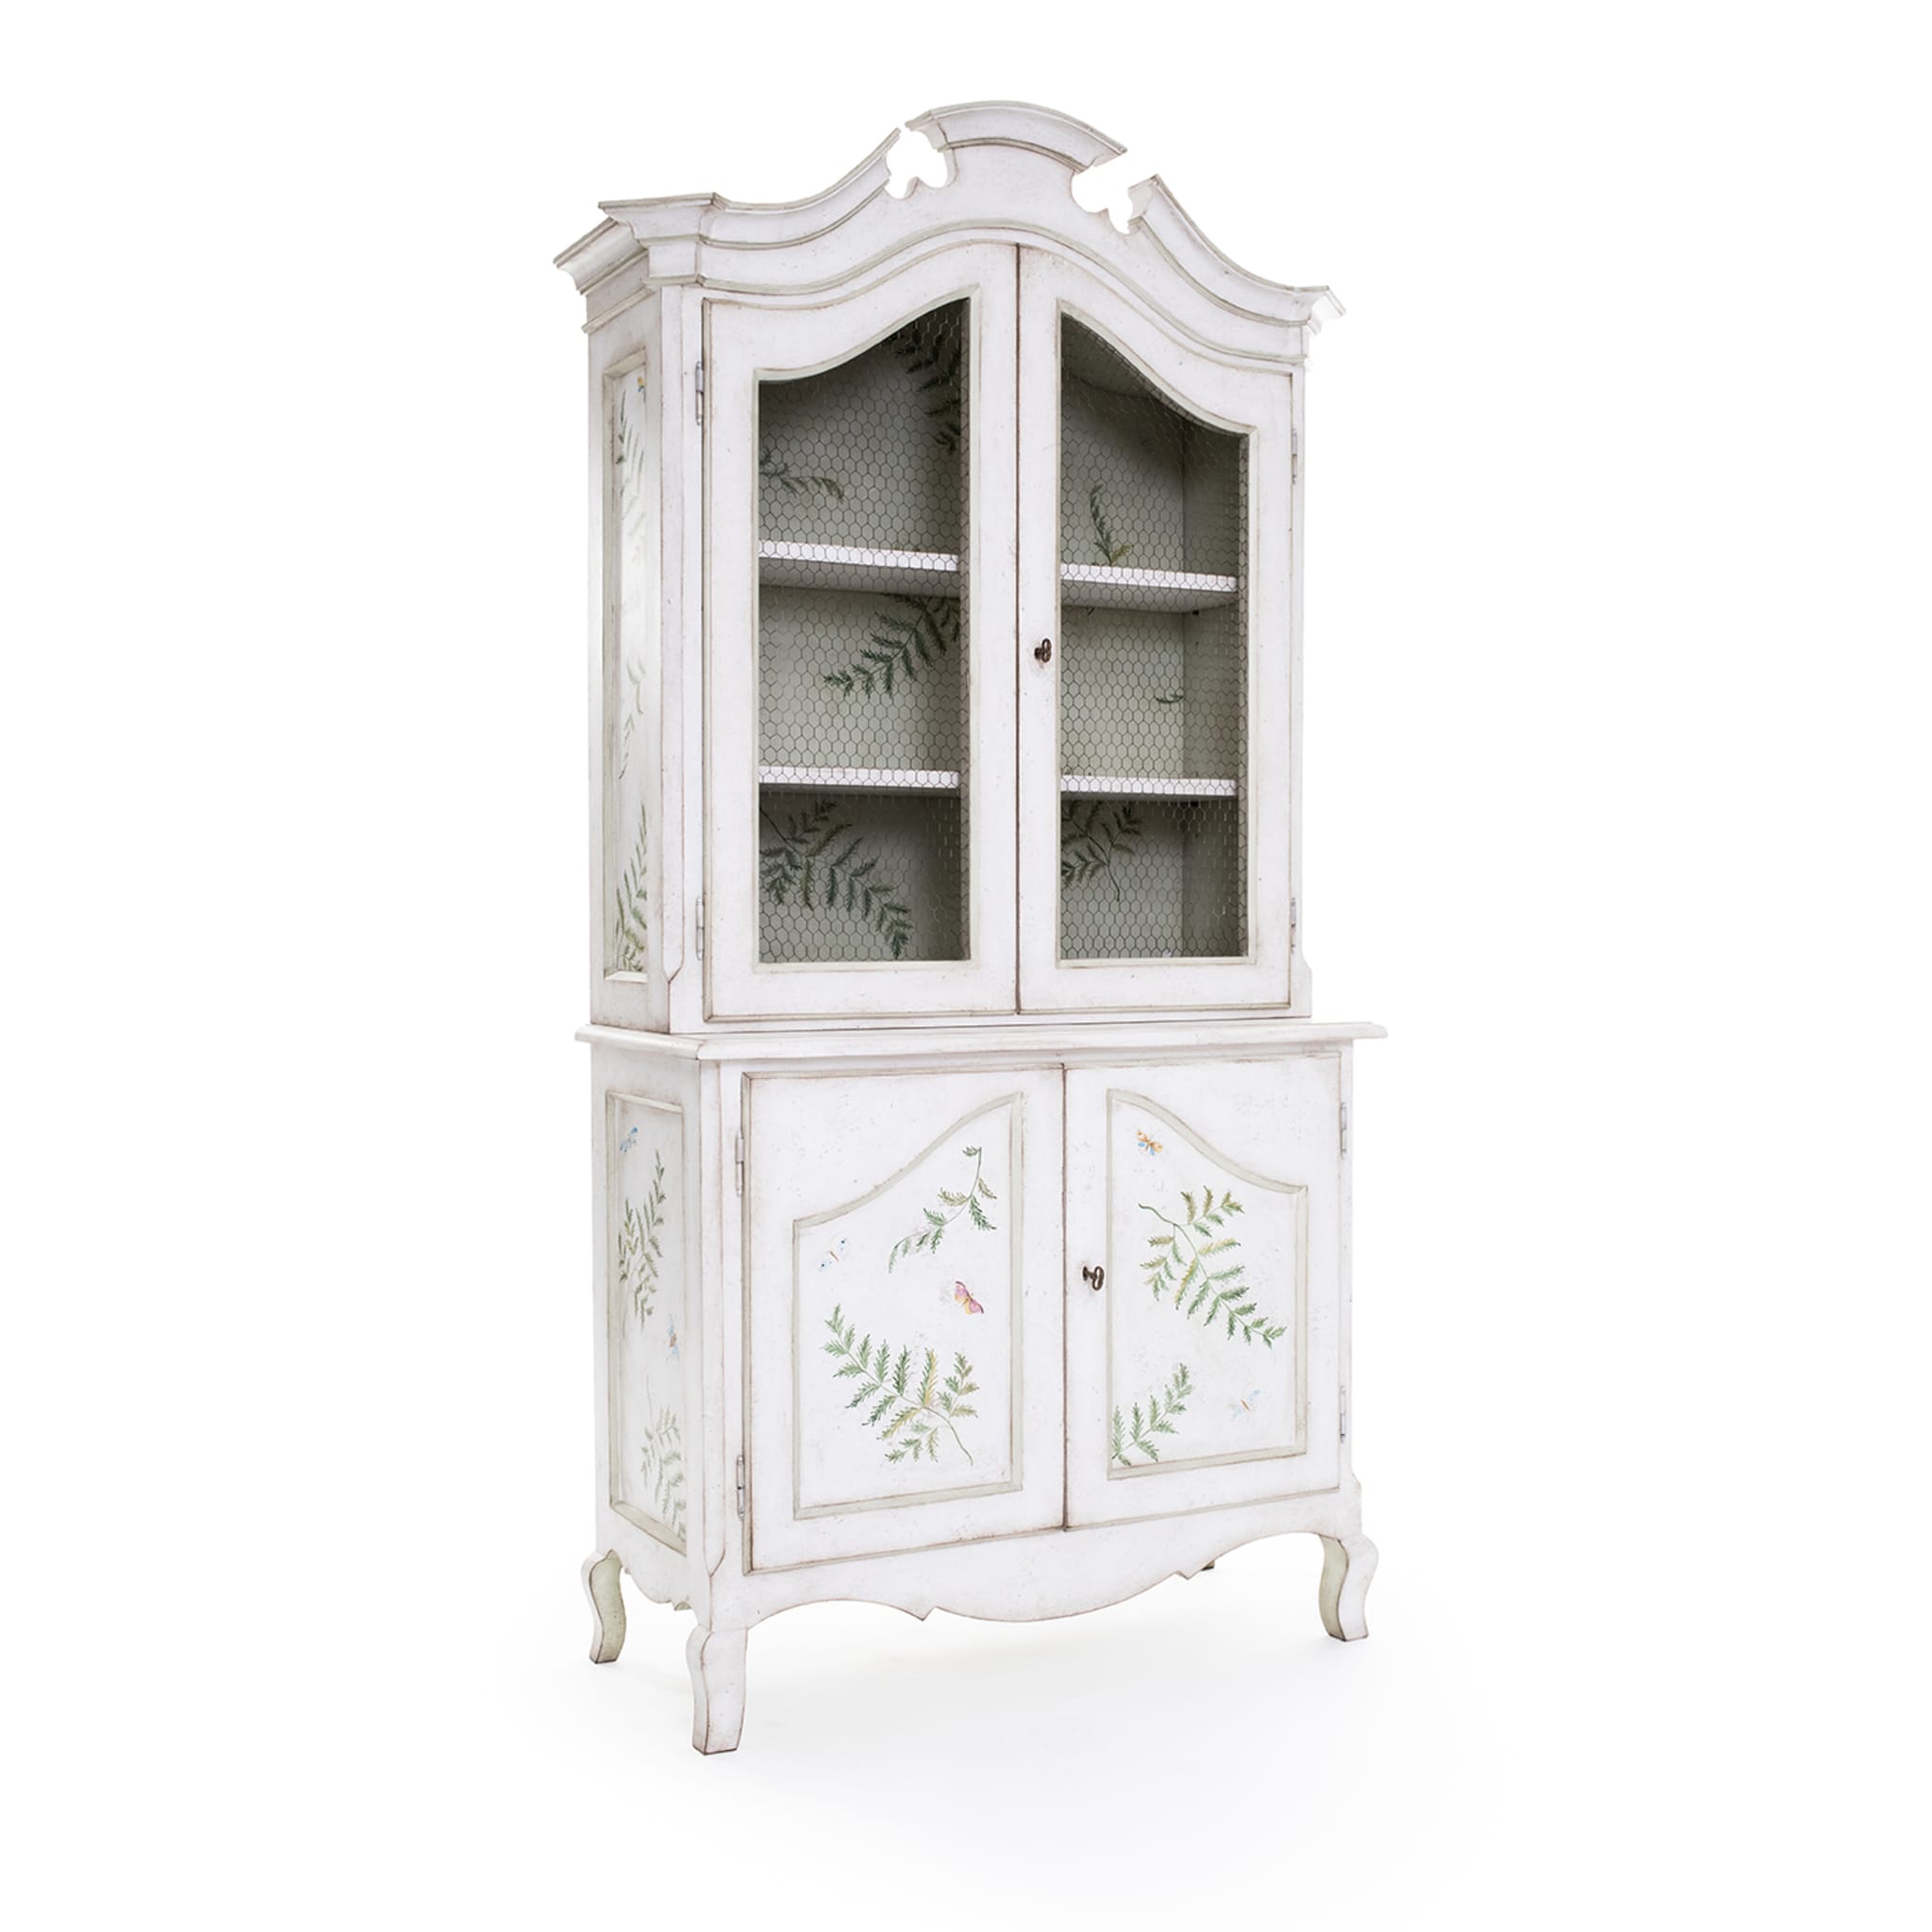 Chalky White Padua Hutch with Ferns and Butterflies - Alternative view 5